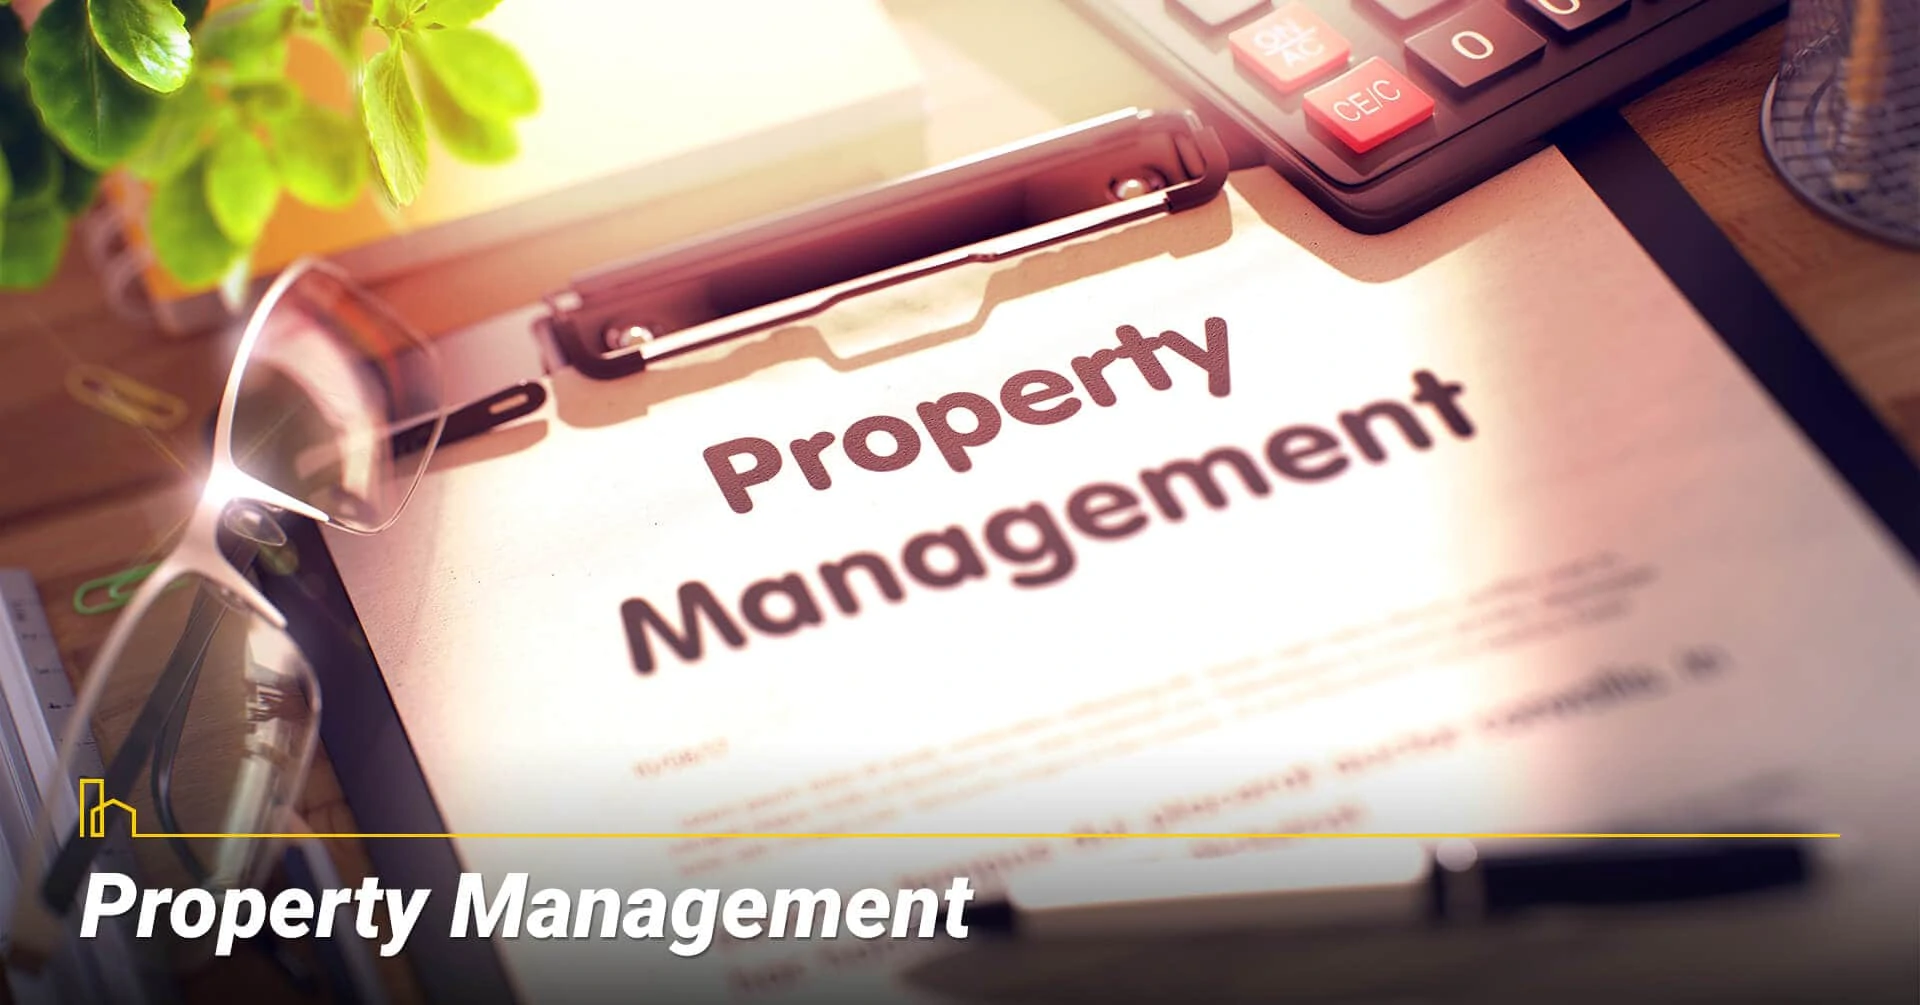 Property Management, Management your property well